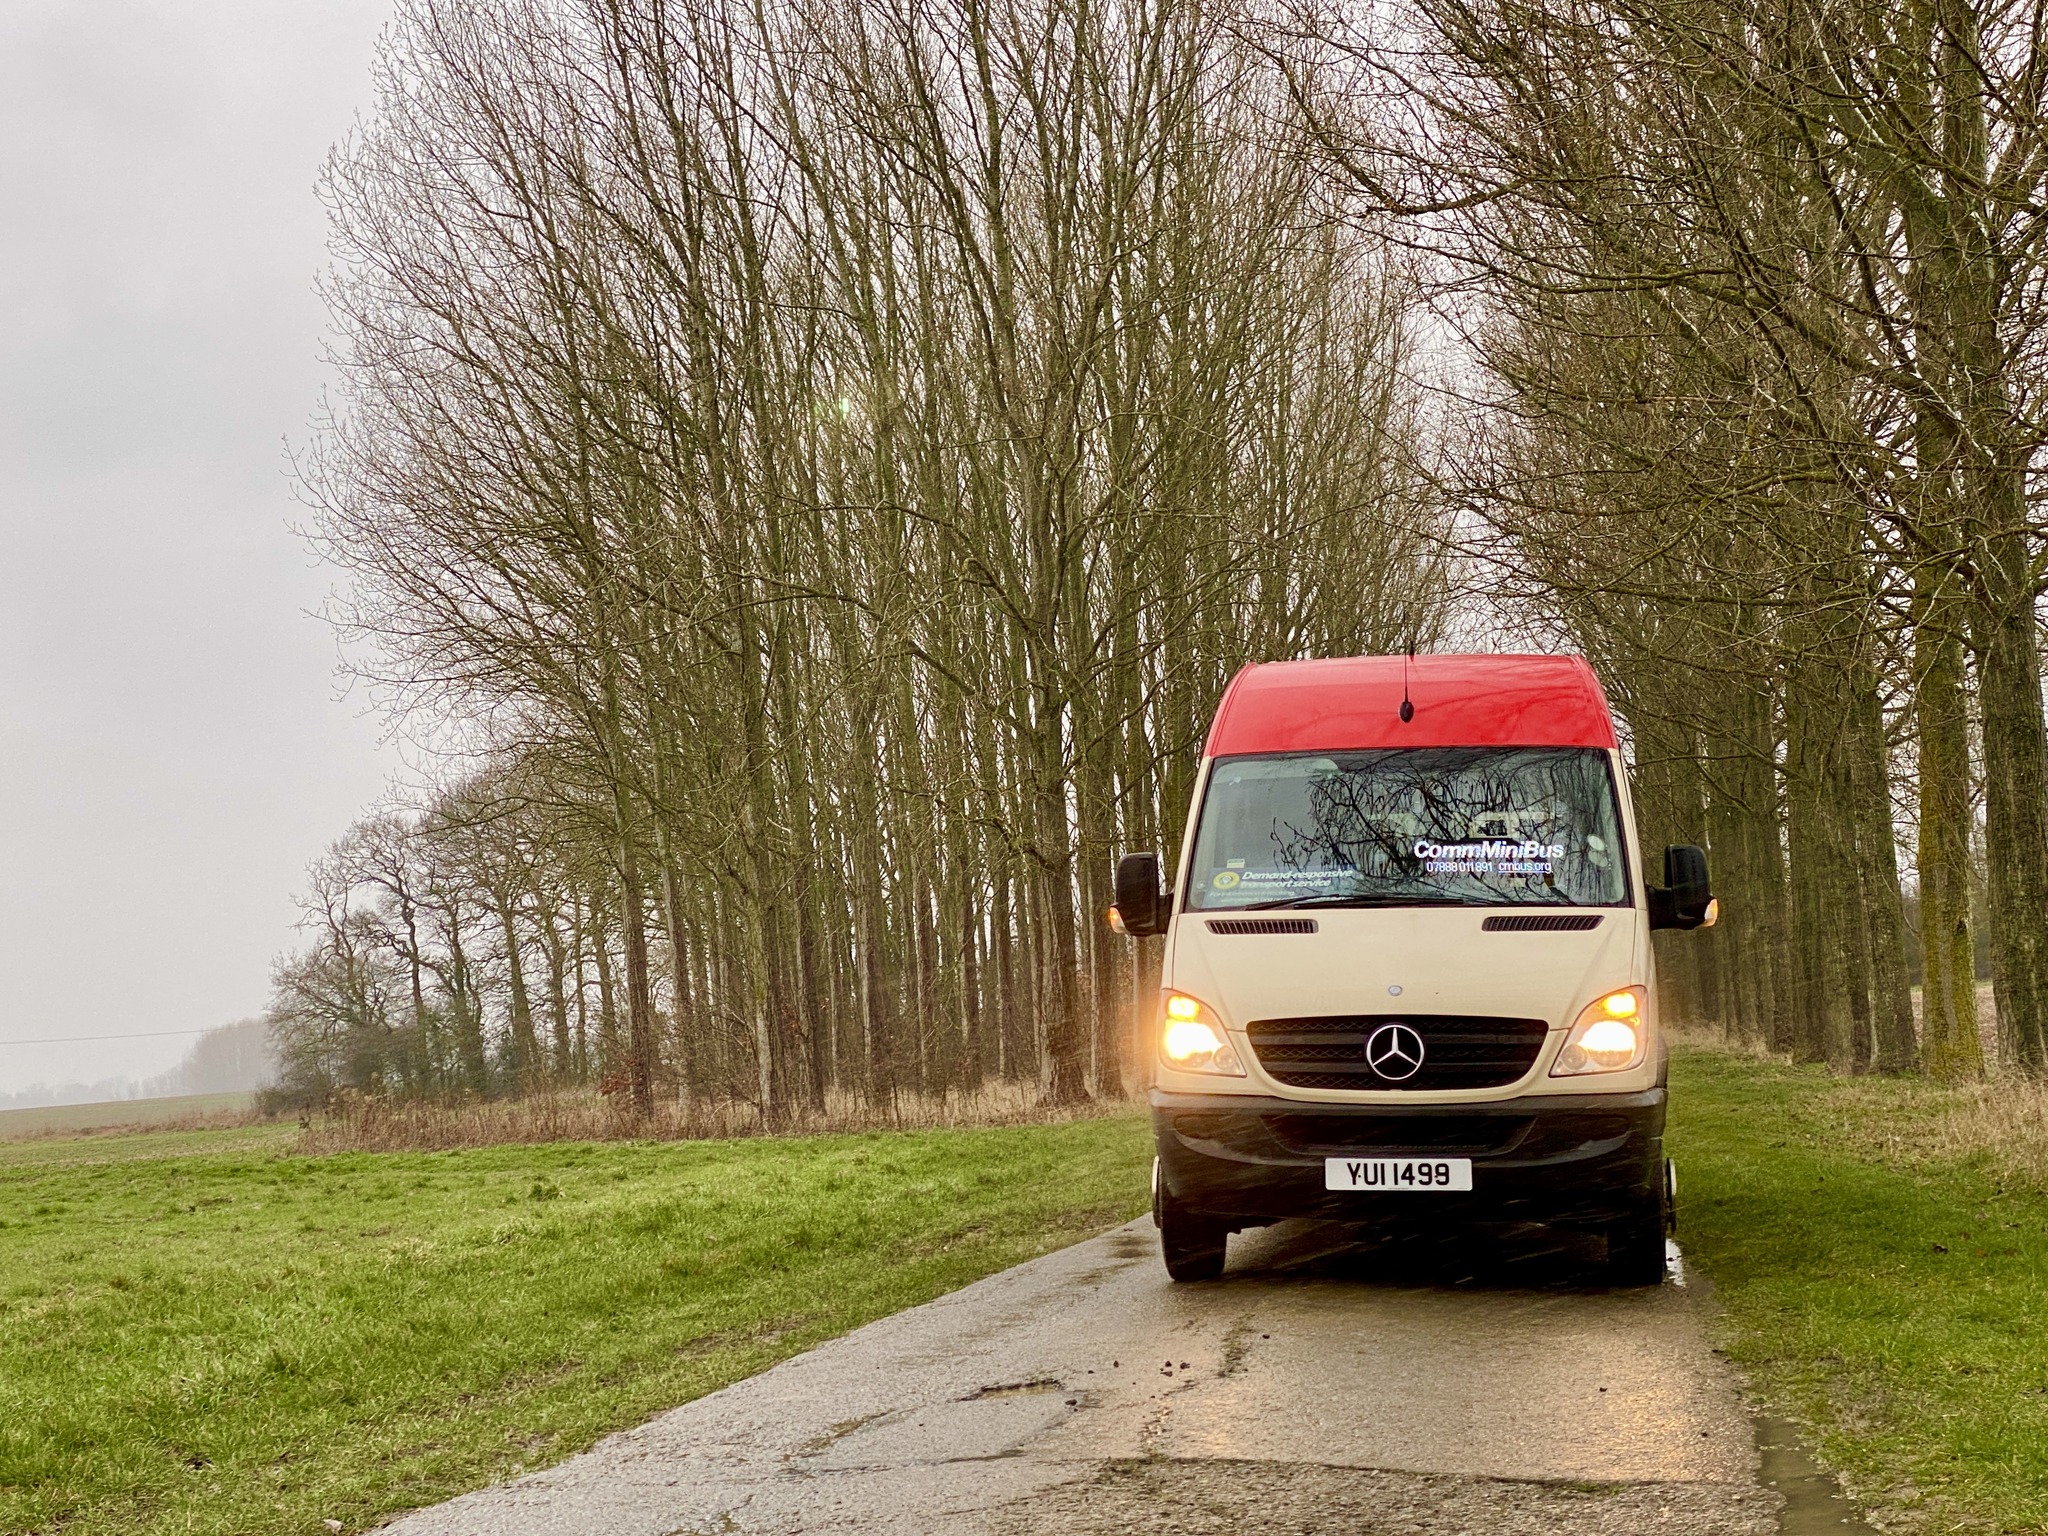 Comms Minibus on a country road